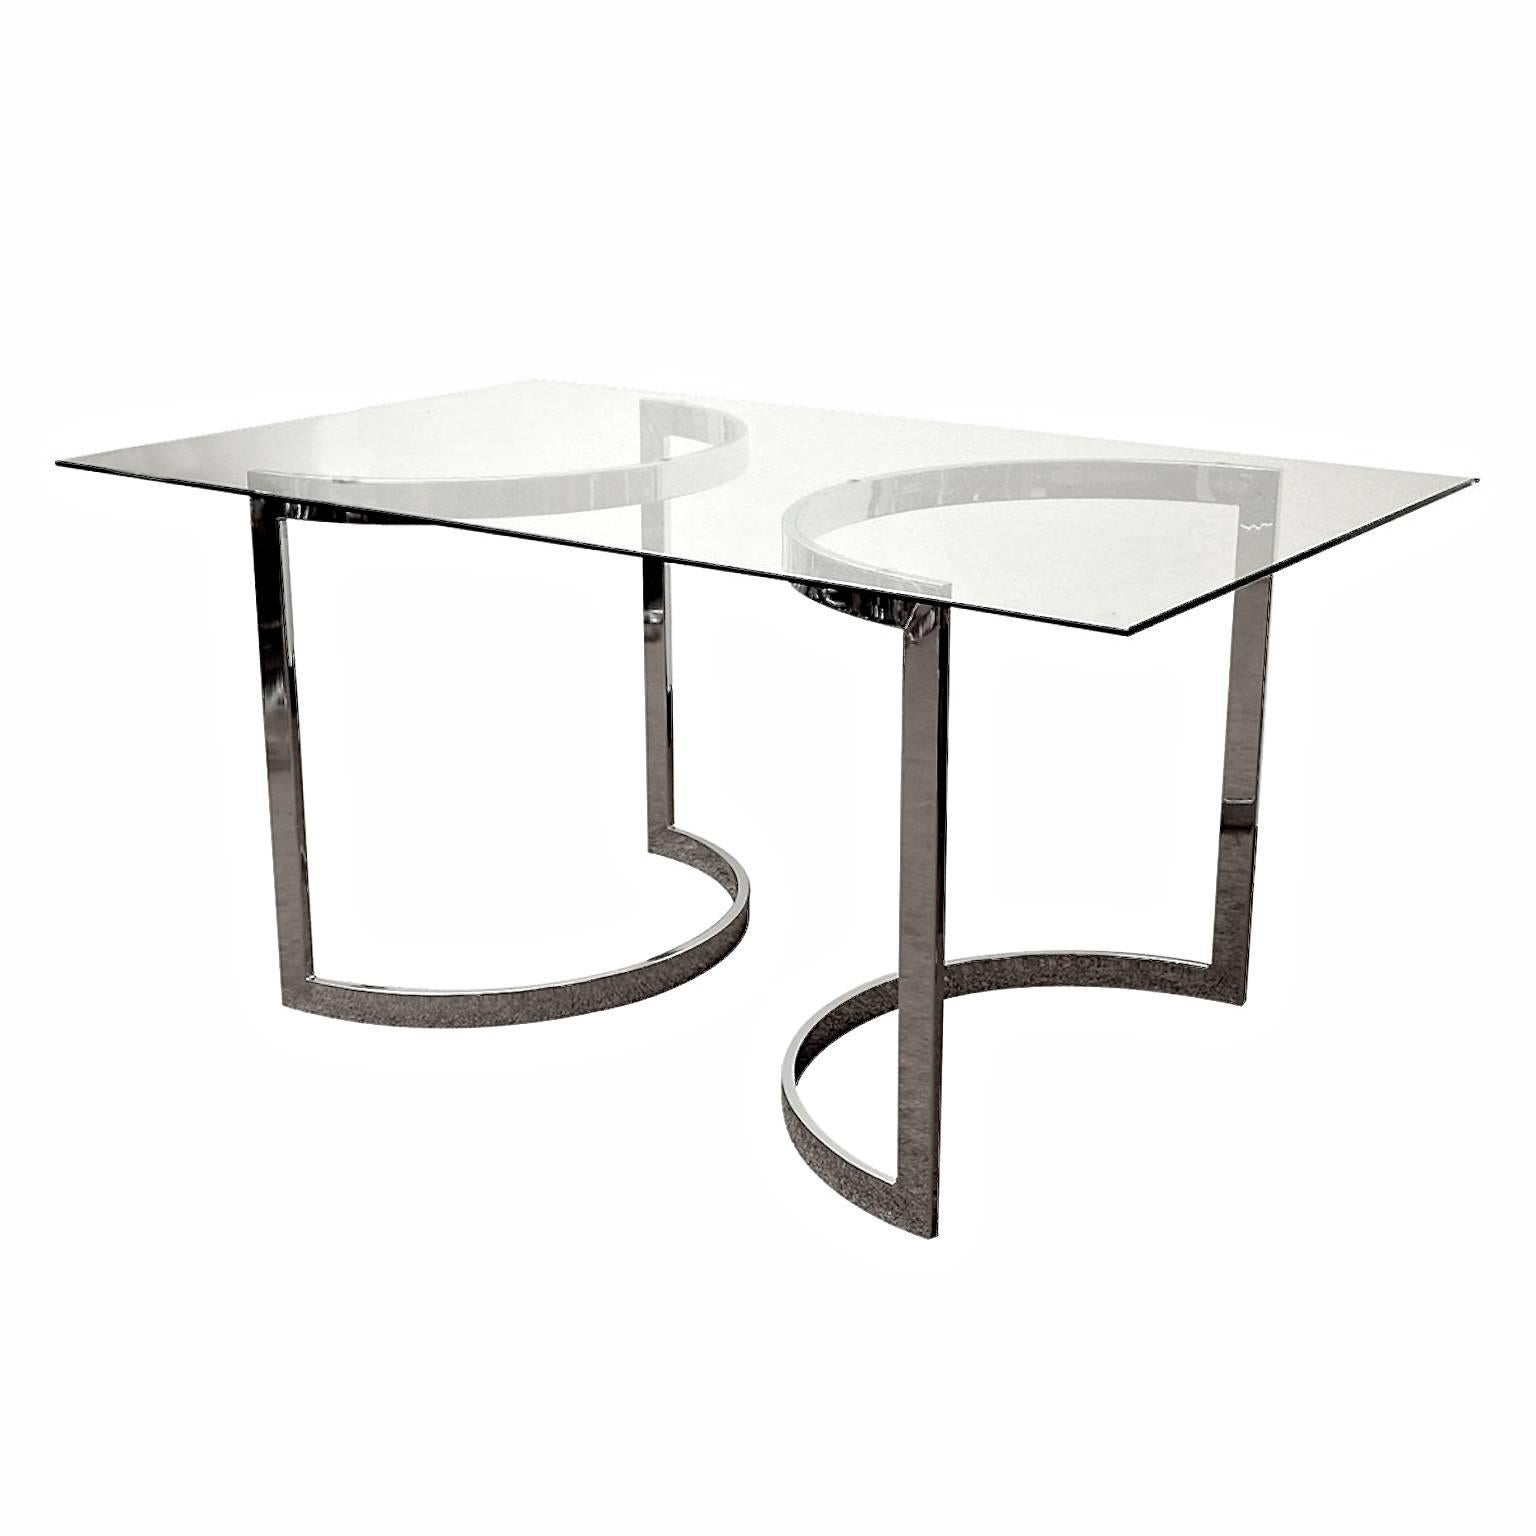 This 1970s table consists of a pair of chromed steel demilune bases which can be configured to face inwards or outwards. The bases measures 29